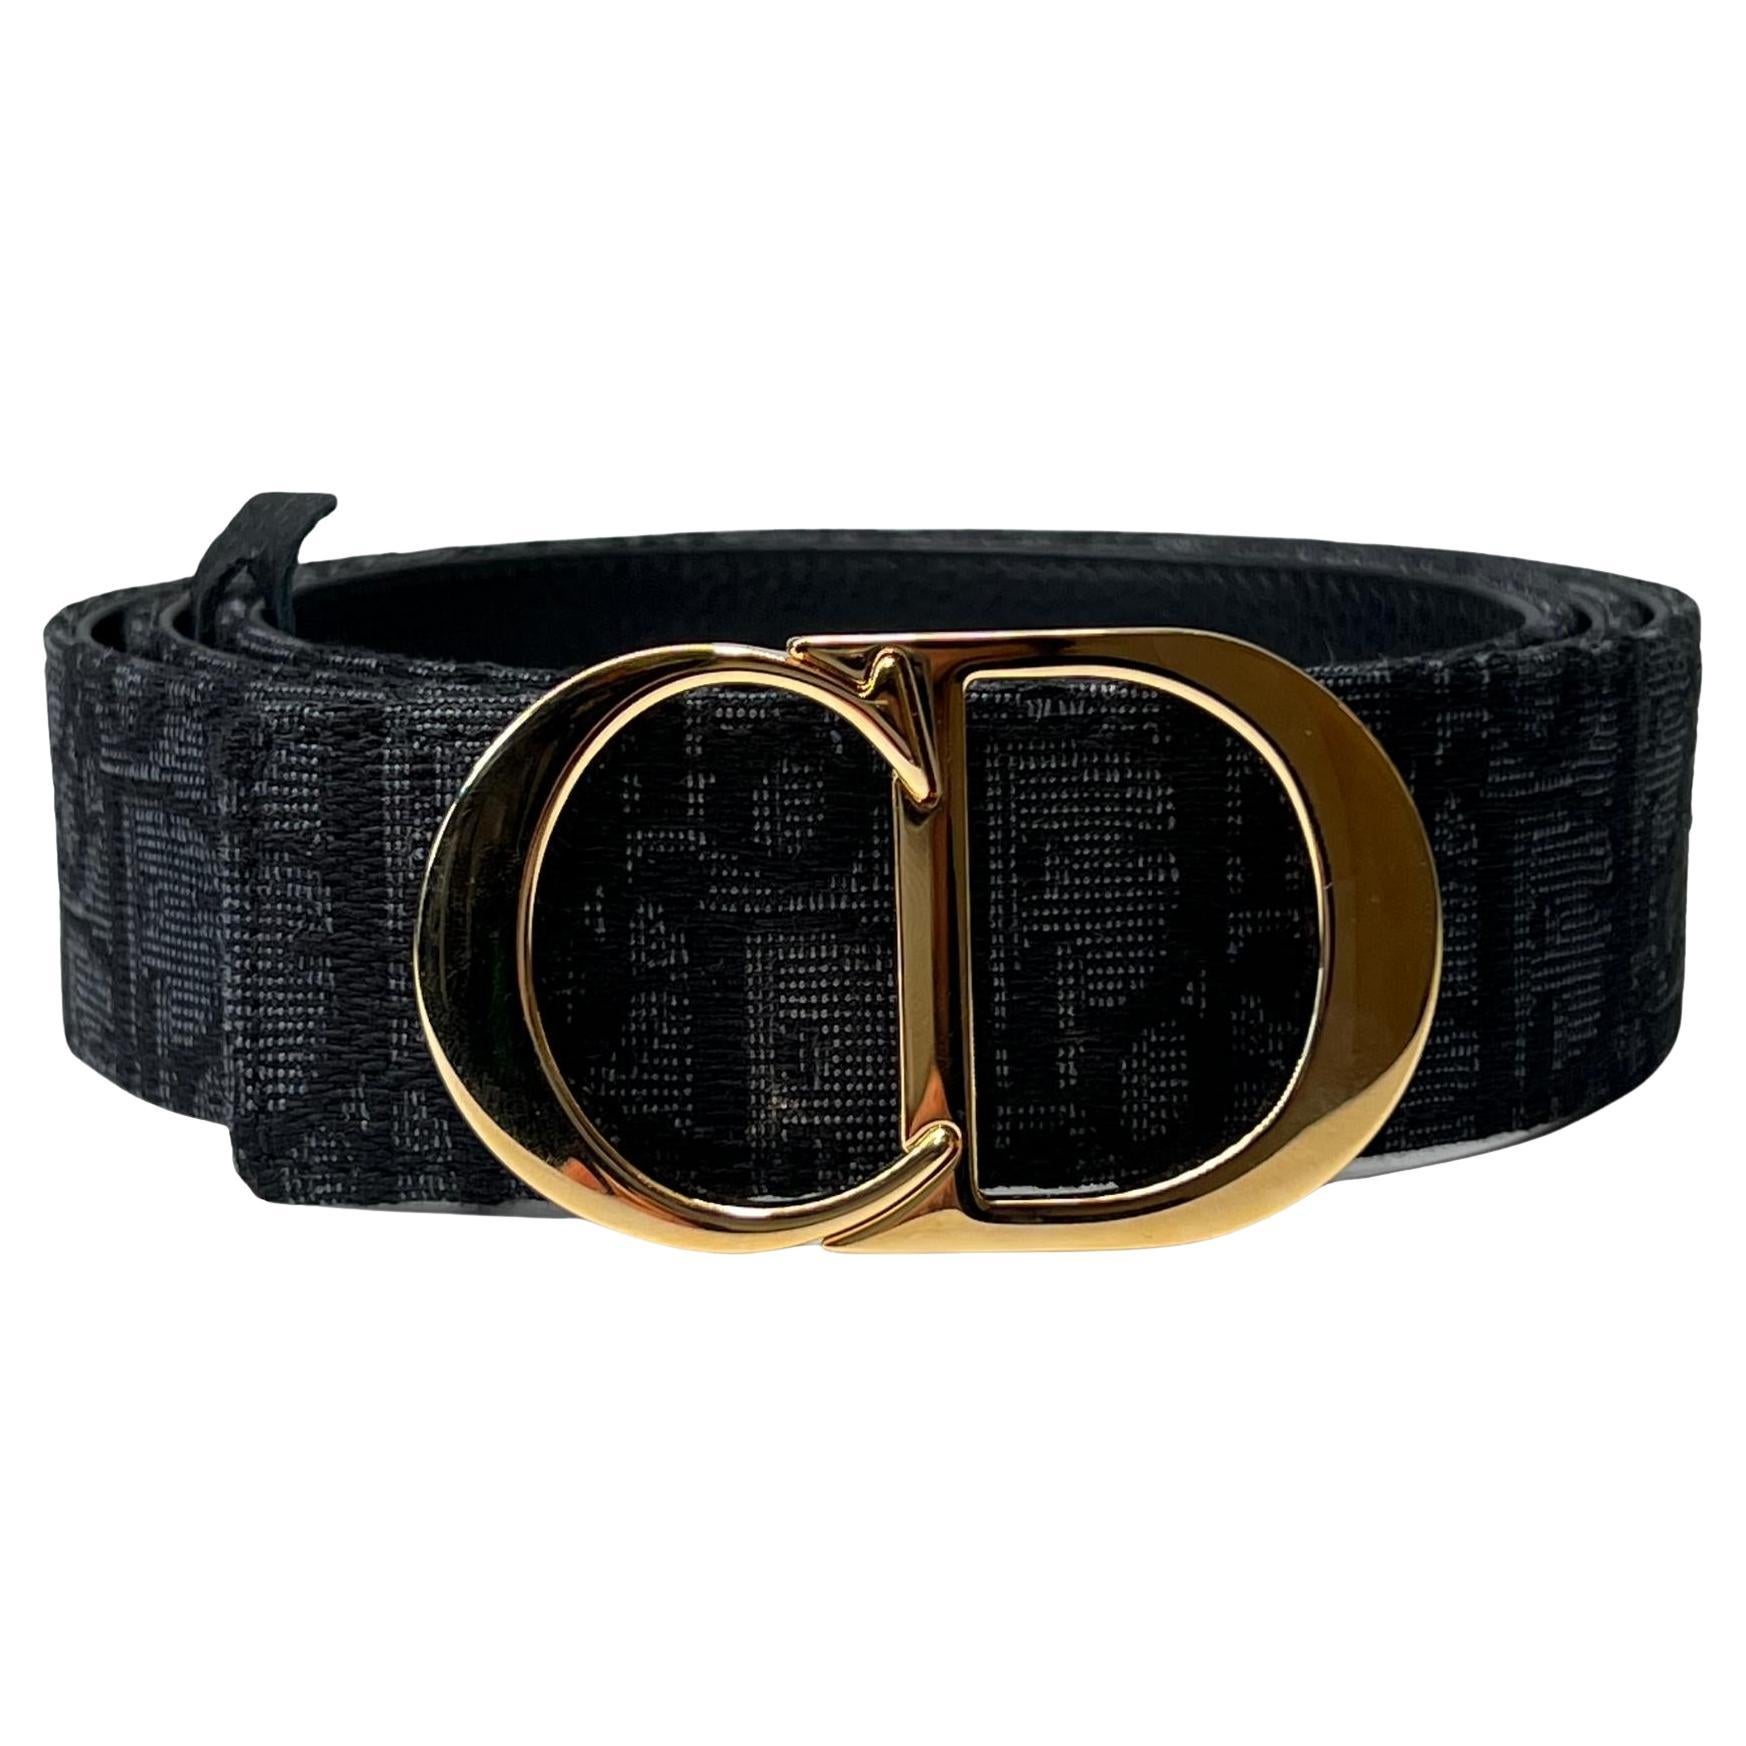 Authentic Christian Dior Men Reversible Belt Mens Fashion Watches   Accessories Belts on Carousell